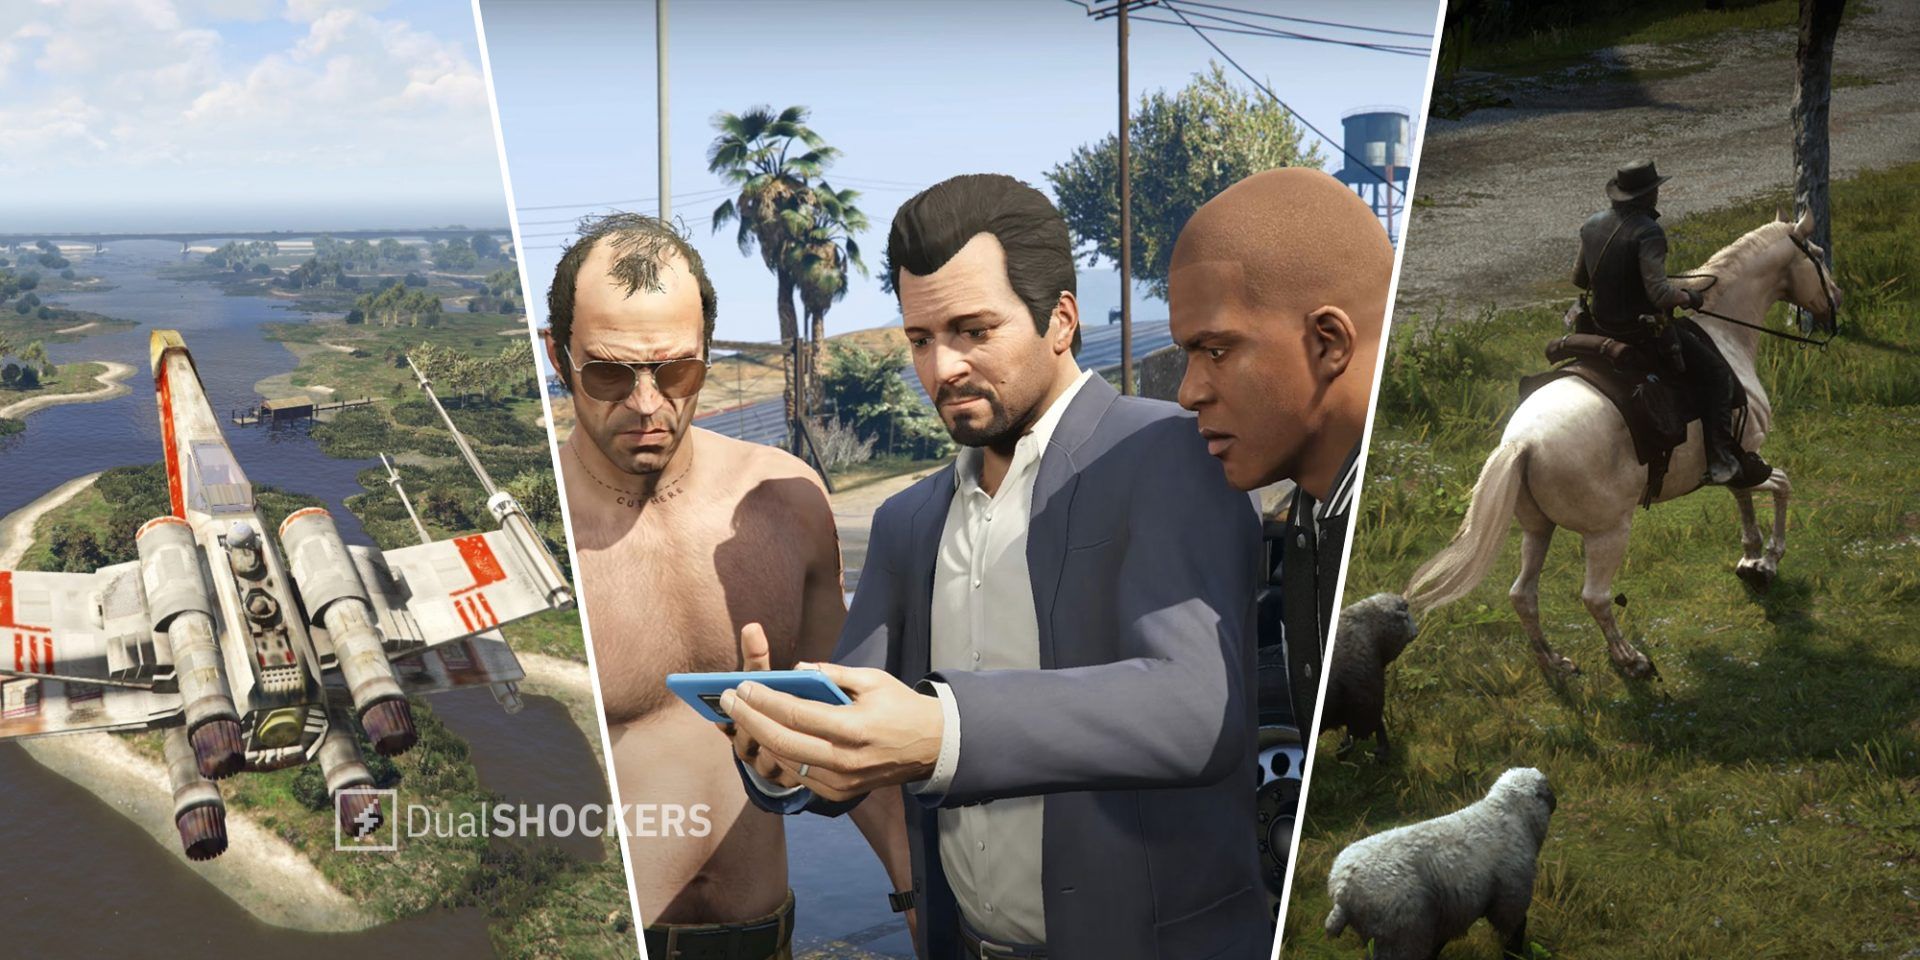 Take-Two Is Taking Down More GTA Mods, Bad News For GTA Modders